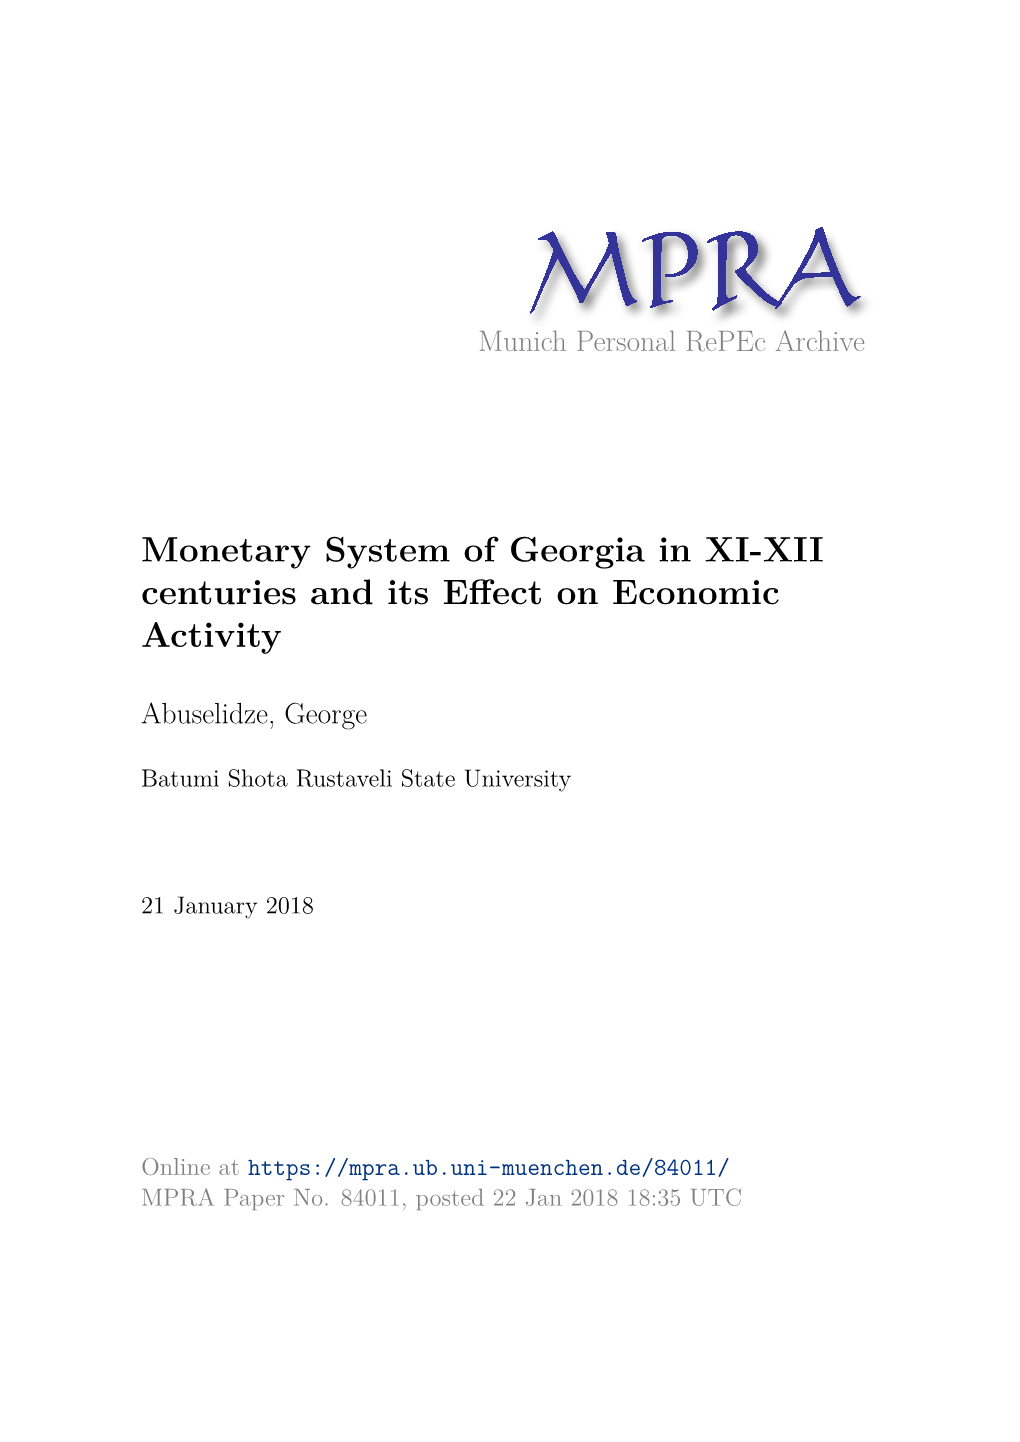 Monetary System of Georgia in XI-XII Centuries and Its Effect on Economic Activity